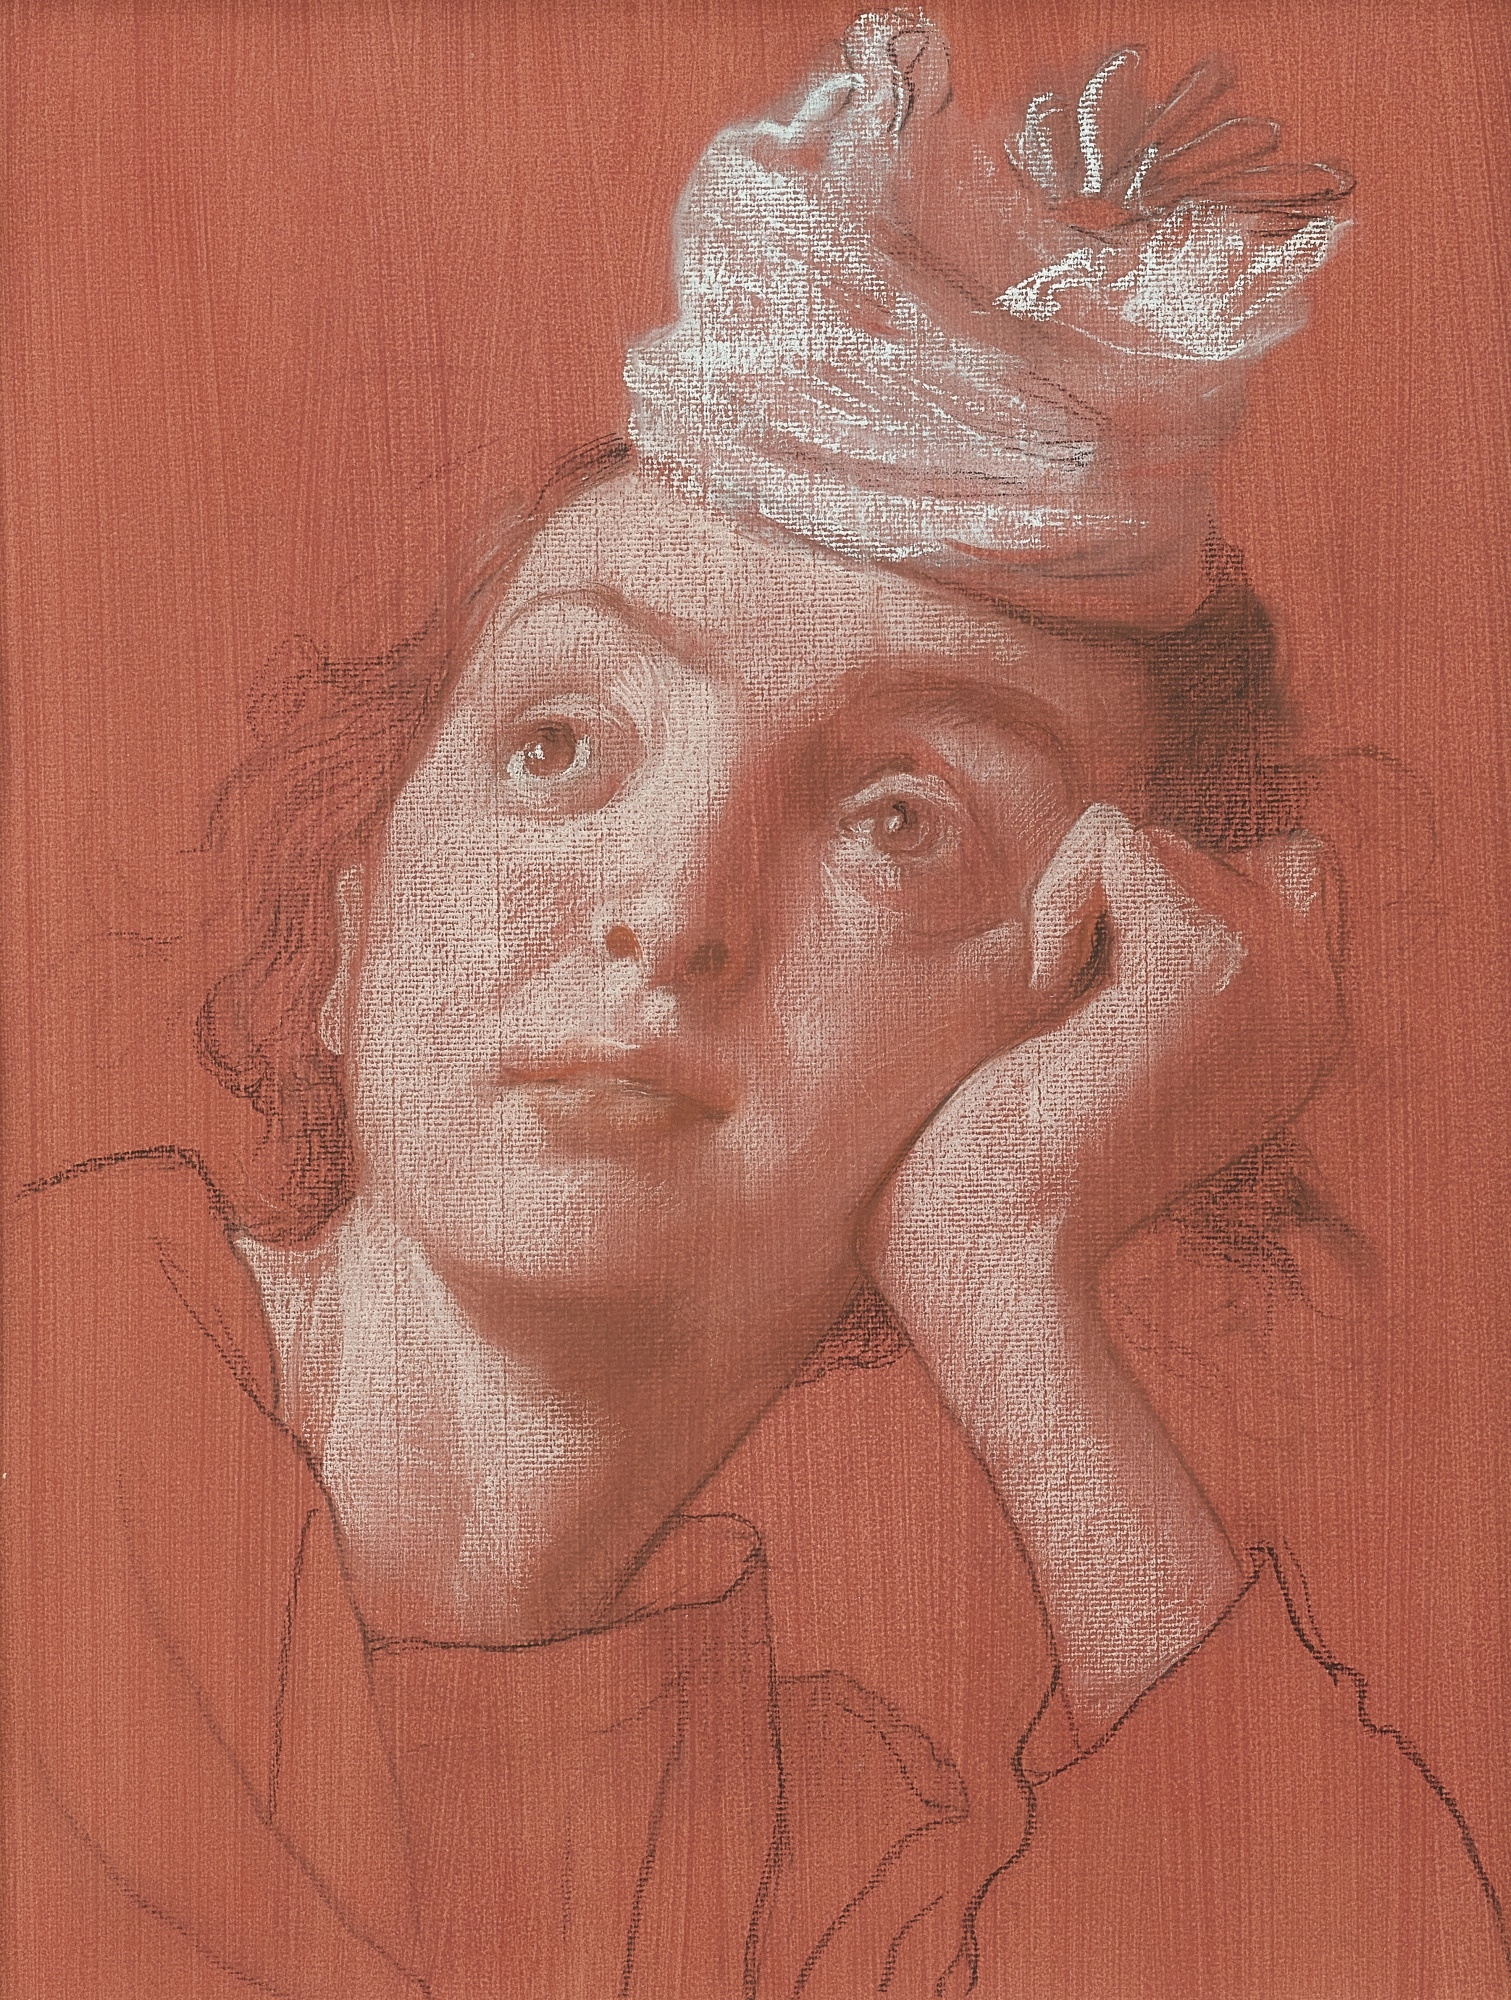 Study for the Penitent by John Currin, 2004